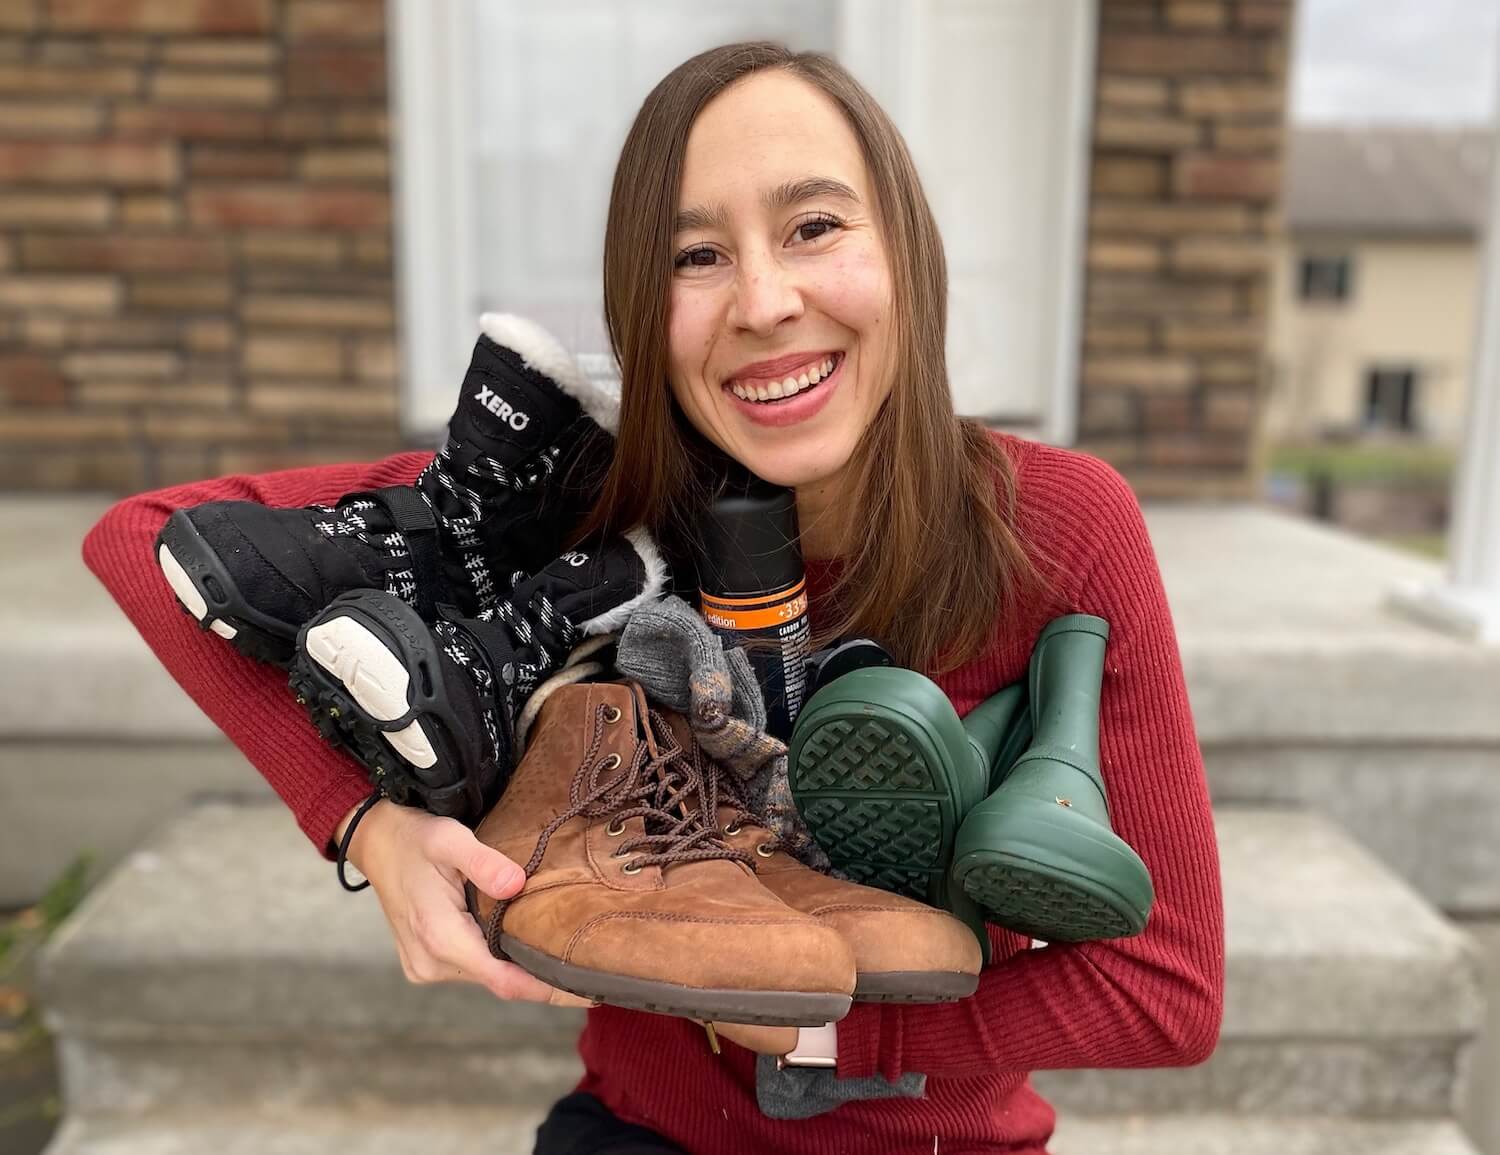 How to Winterproof Your Barefoot Shoes by Anya's Reviews - Xero Shoes